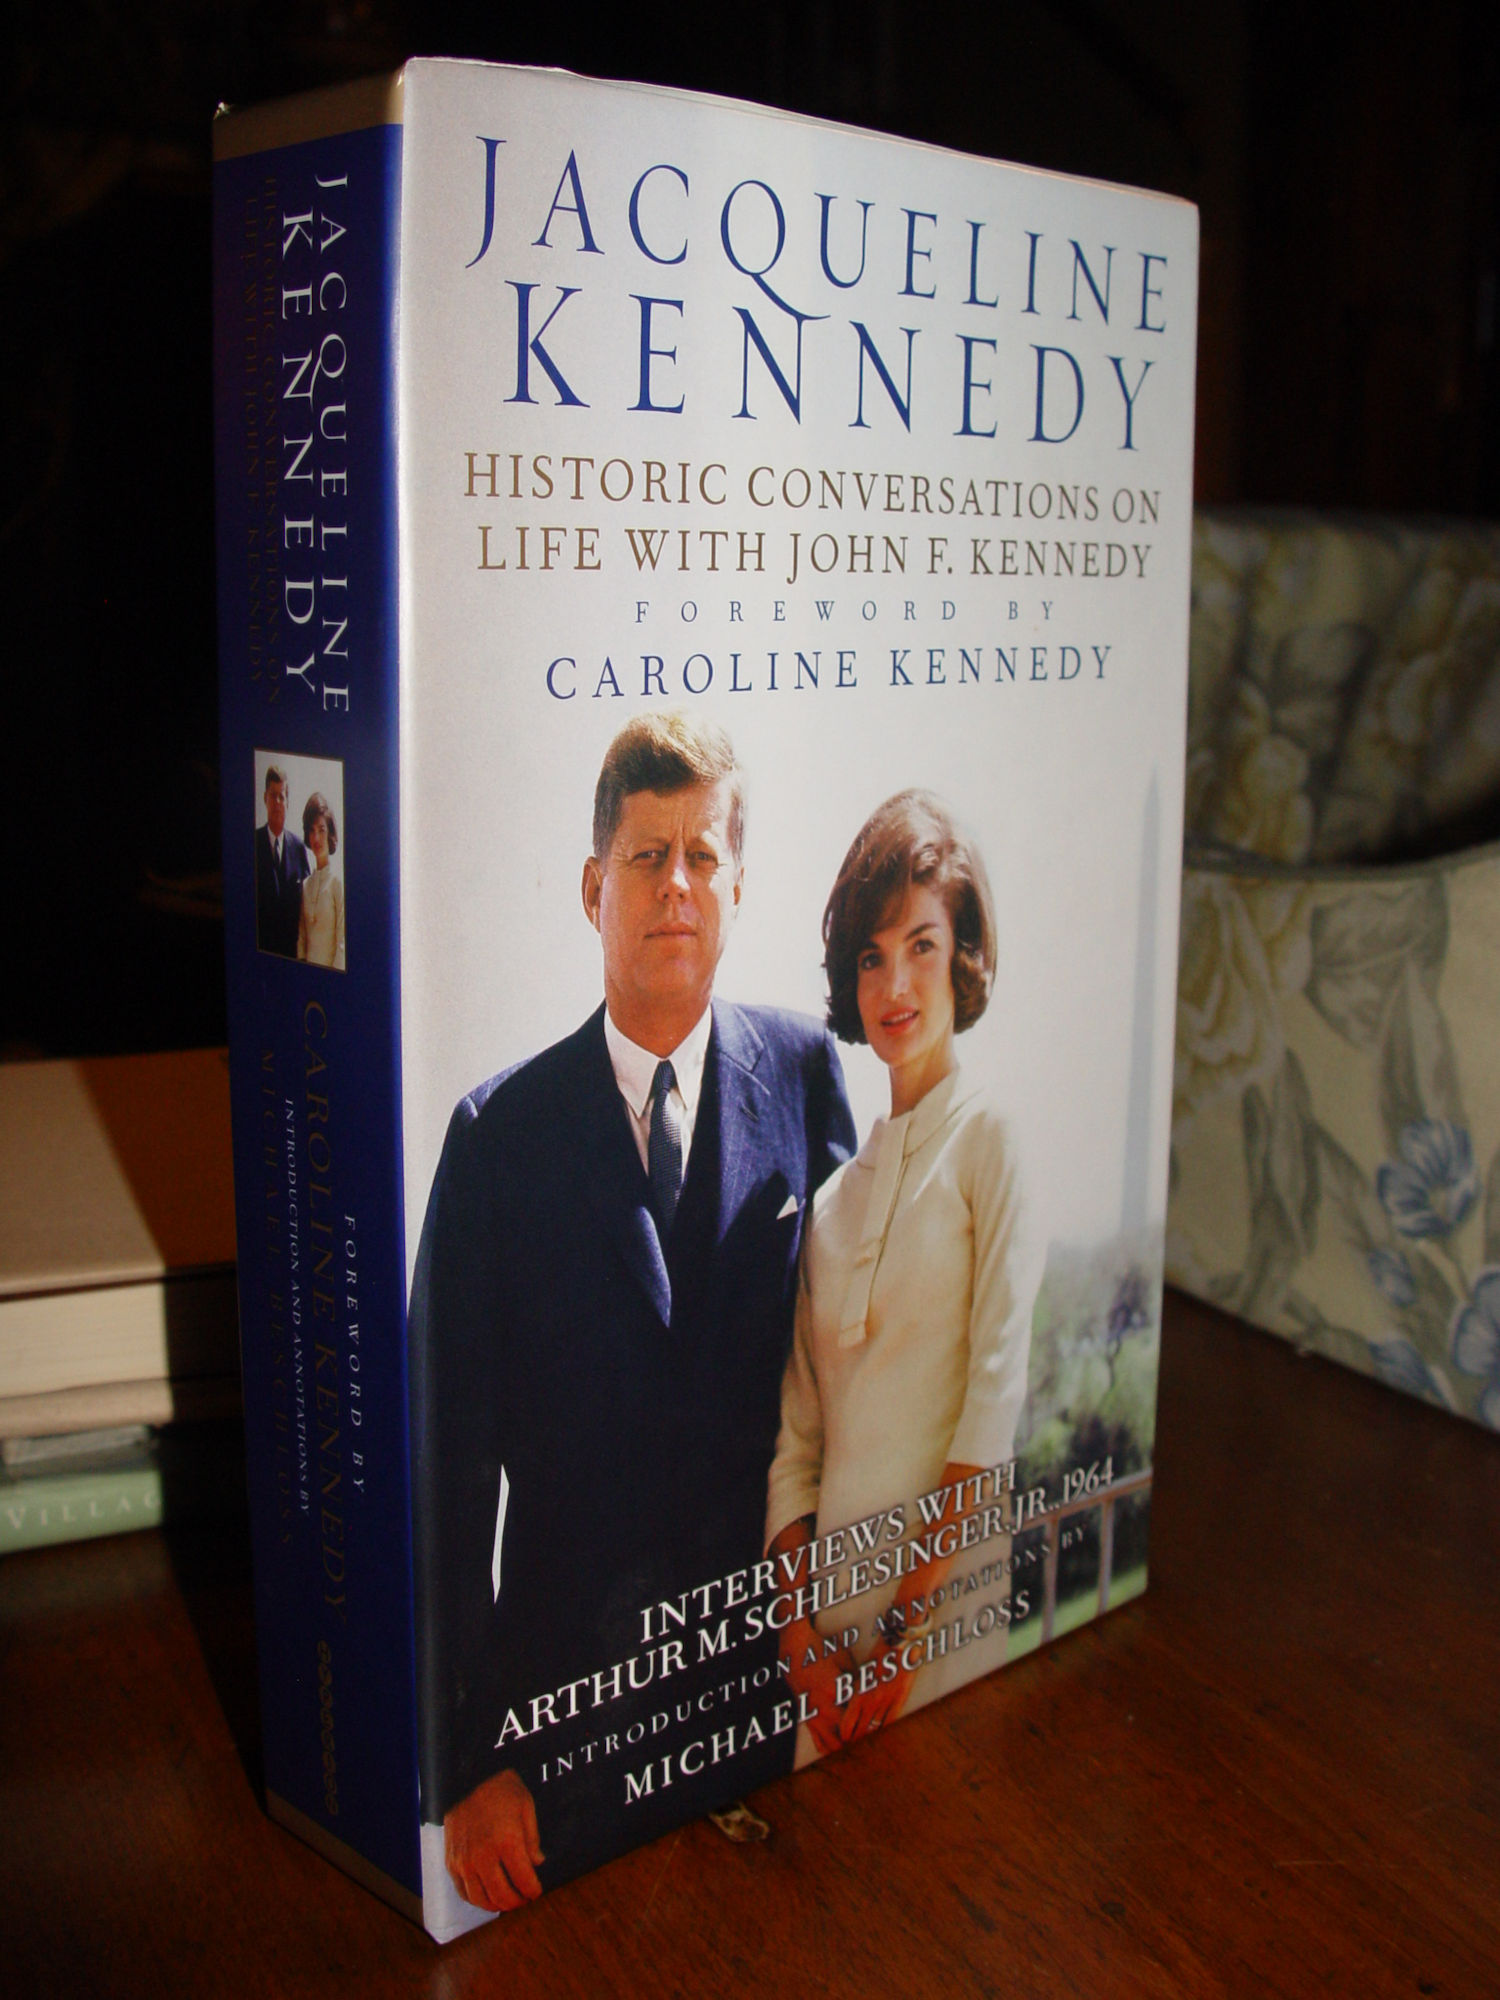 Jacqueline Kennedy: Historic Conversations
                        on Life with John F. Kennedy